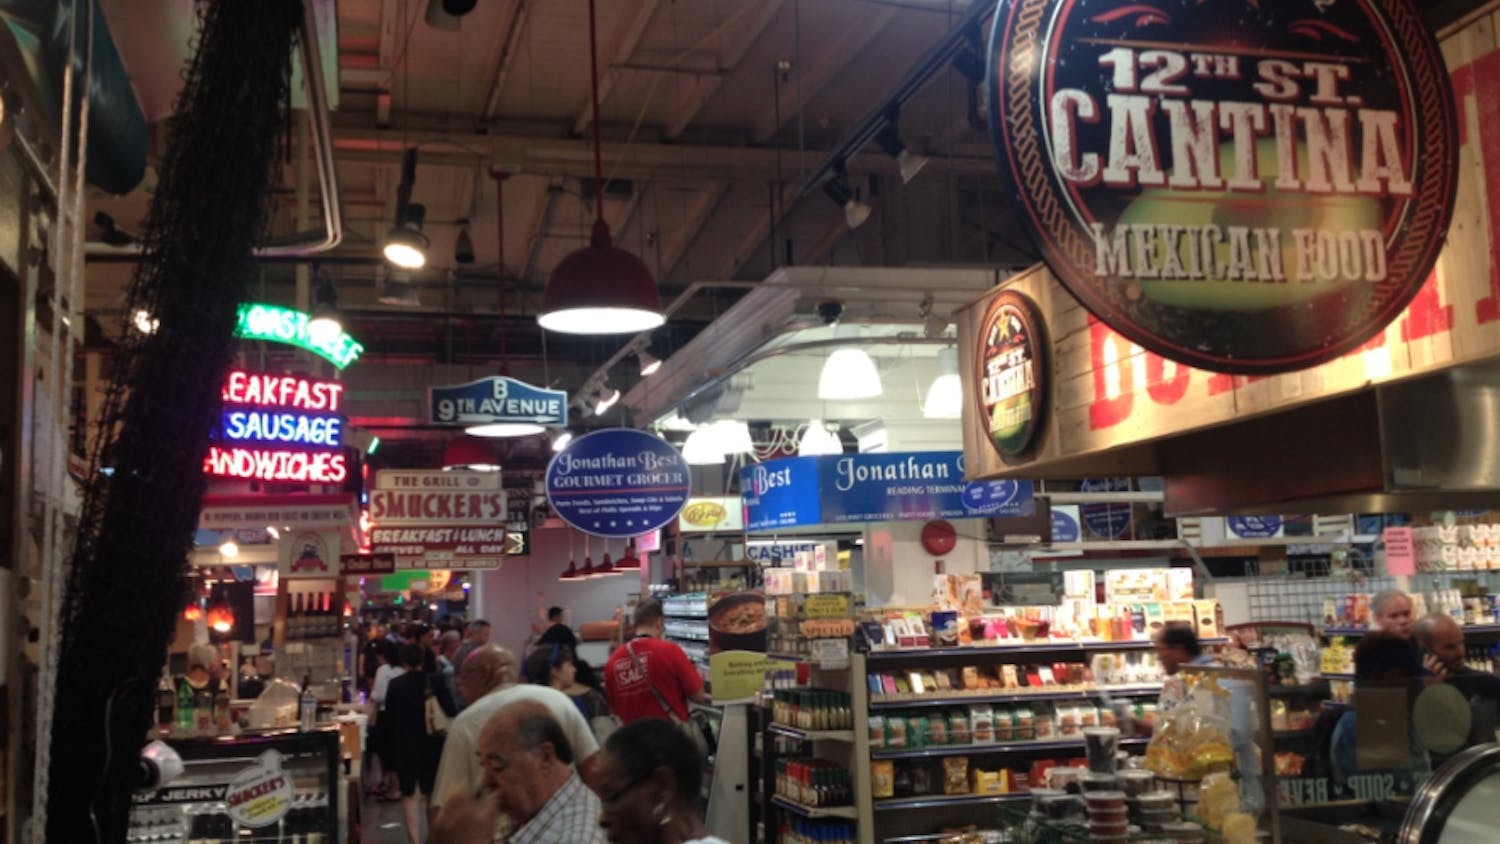 Delegates, tourists and locals shop for lunch at the Reading Terminal Market across the street from the Democratic National Convention in downtown Philadelphia on July 28, 2016.